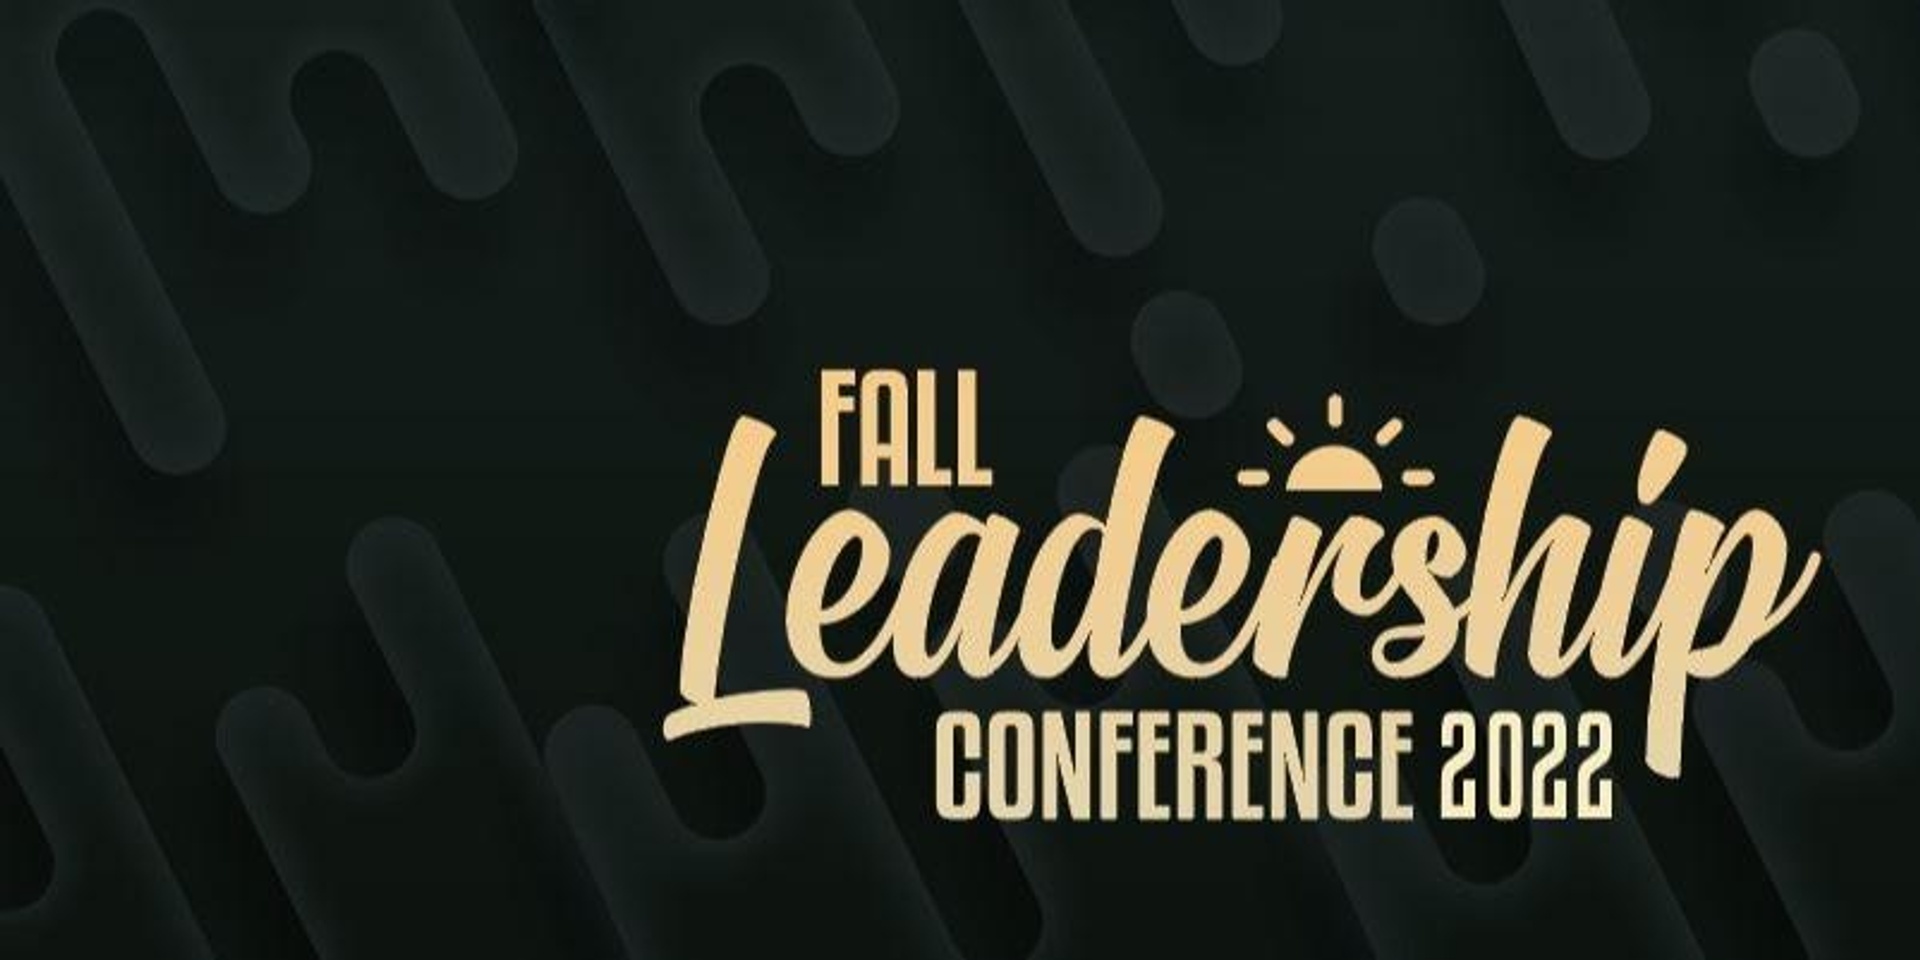 Fall Leadership Conference